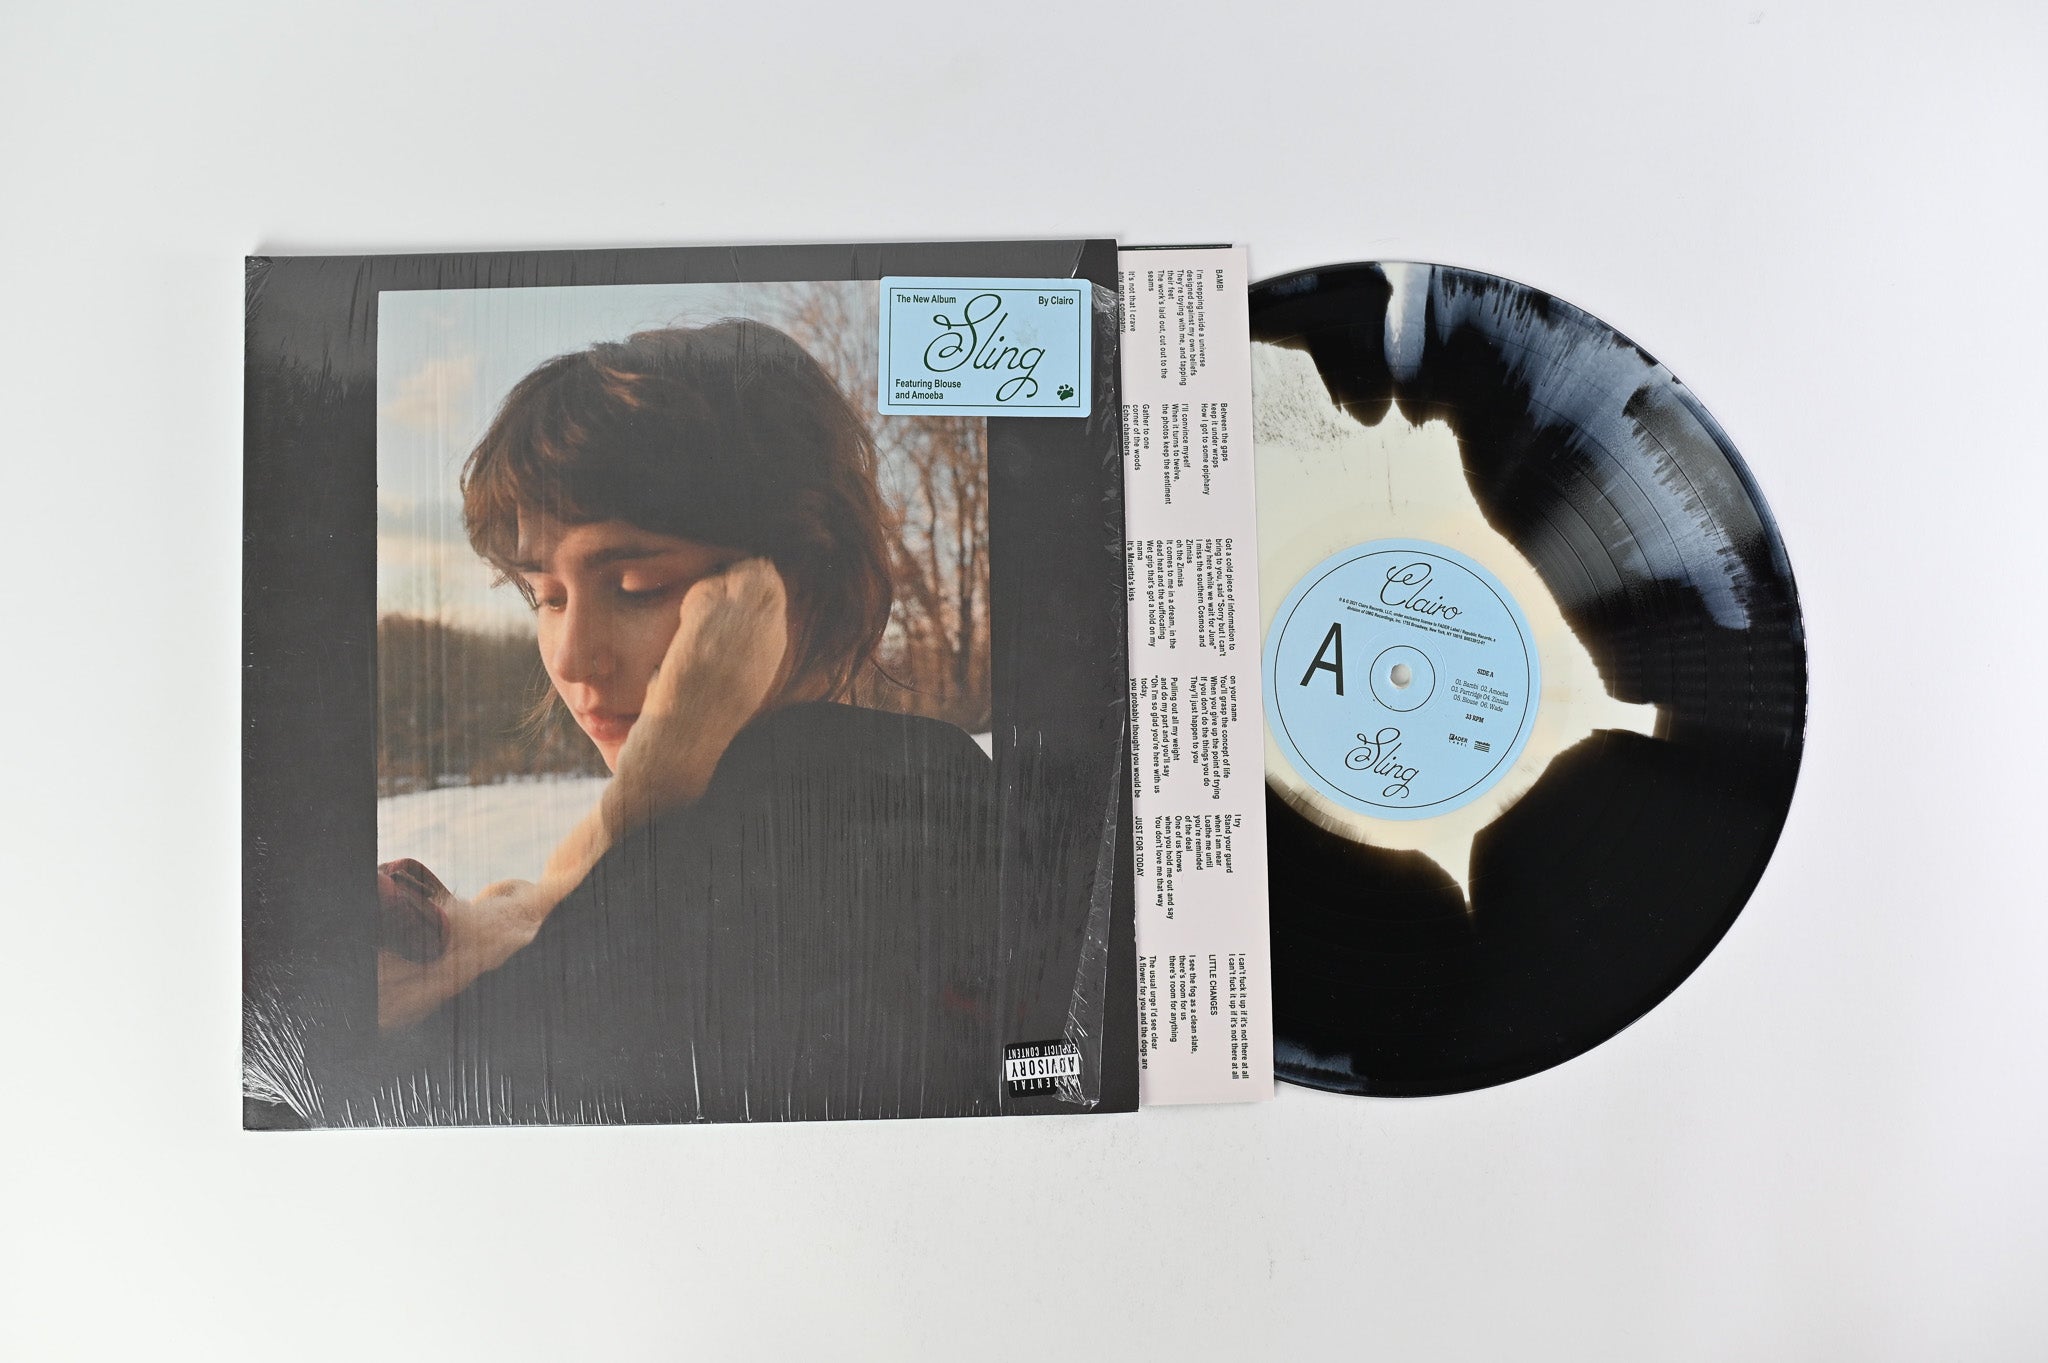 Clairo - Sling on Fader Label/Republic Records RSD Limited Edition on Black & White Swirl Vinyl